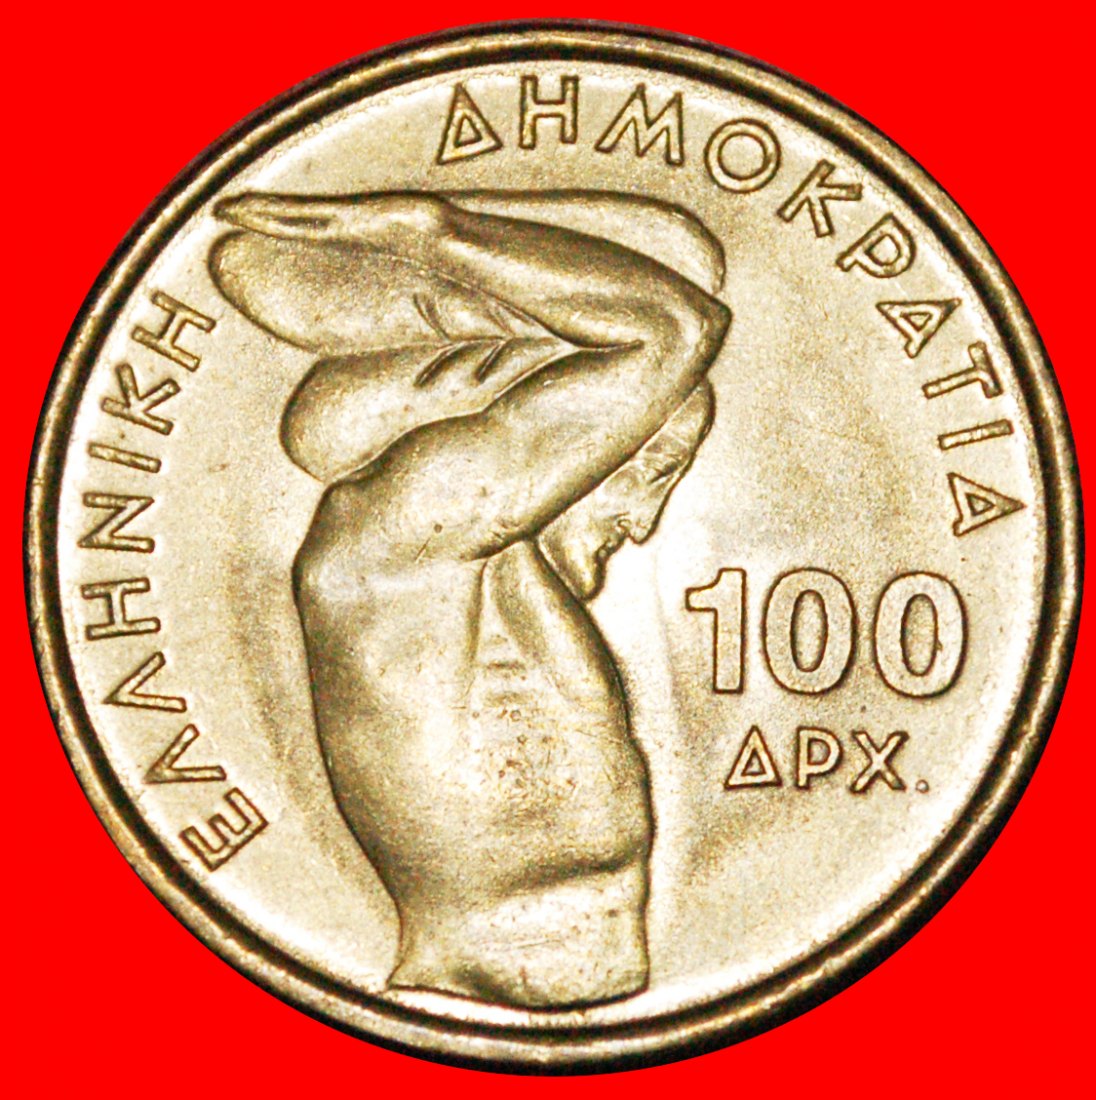  * NUDE HERACLES: GREECE★ 100 DRACHMAS 1999 MINT LUSTRE!★LOW START ★ NO RESERVE!   